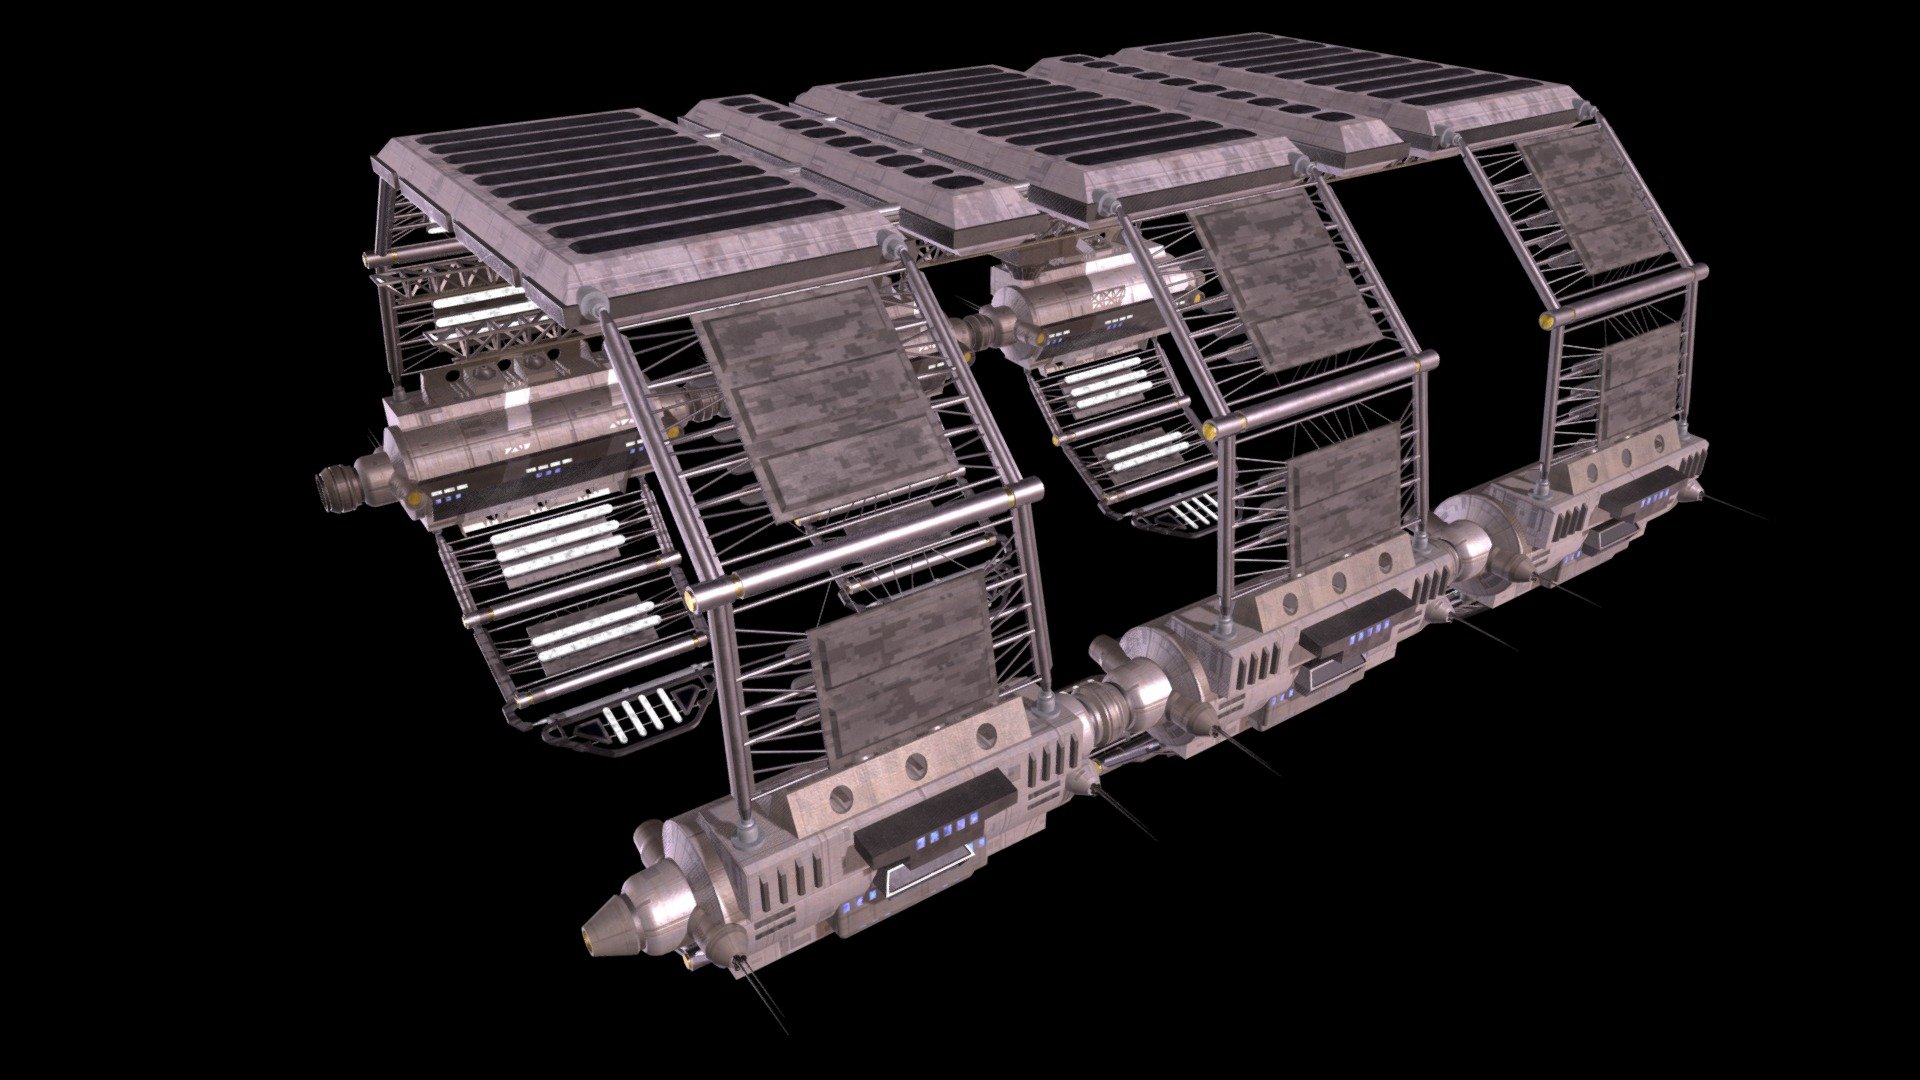 My 3D model of an NX-era drydock (from the 22nd century), as first seen in Star Trek: Enterprise season 2. Based on references of the Columbia's Orbital Drydock Facility 314 Station 18 A by Robert Bonchune.

You can purchase it here: https://ko-fi.com/s/c4f8dc6f99 - Orbital Drydock Facility (Star Trek: Enterprise) - 3D model by Pundus Art (@Pundus_Art) 3d model